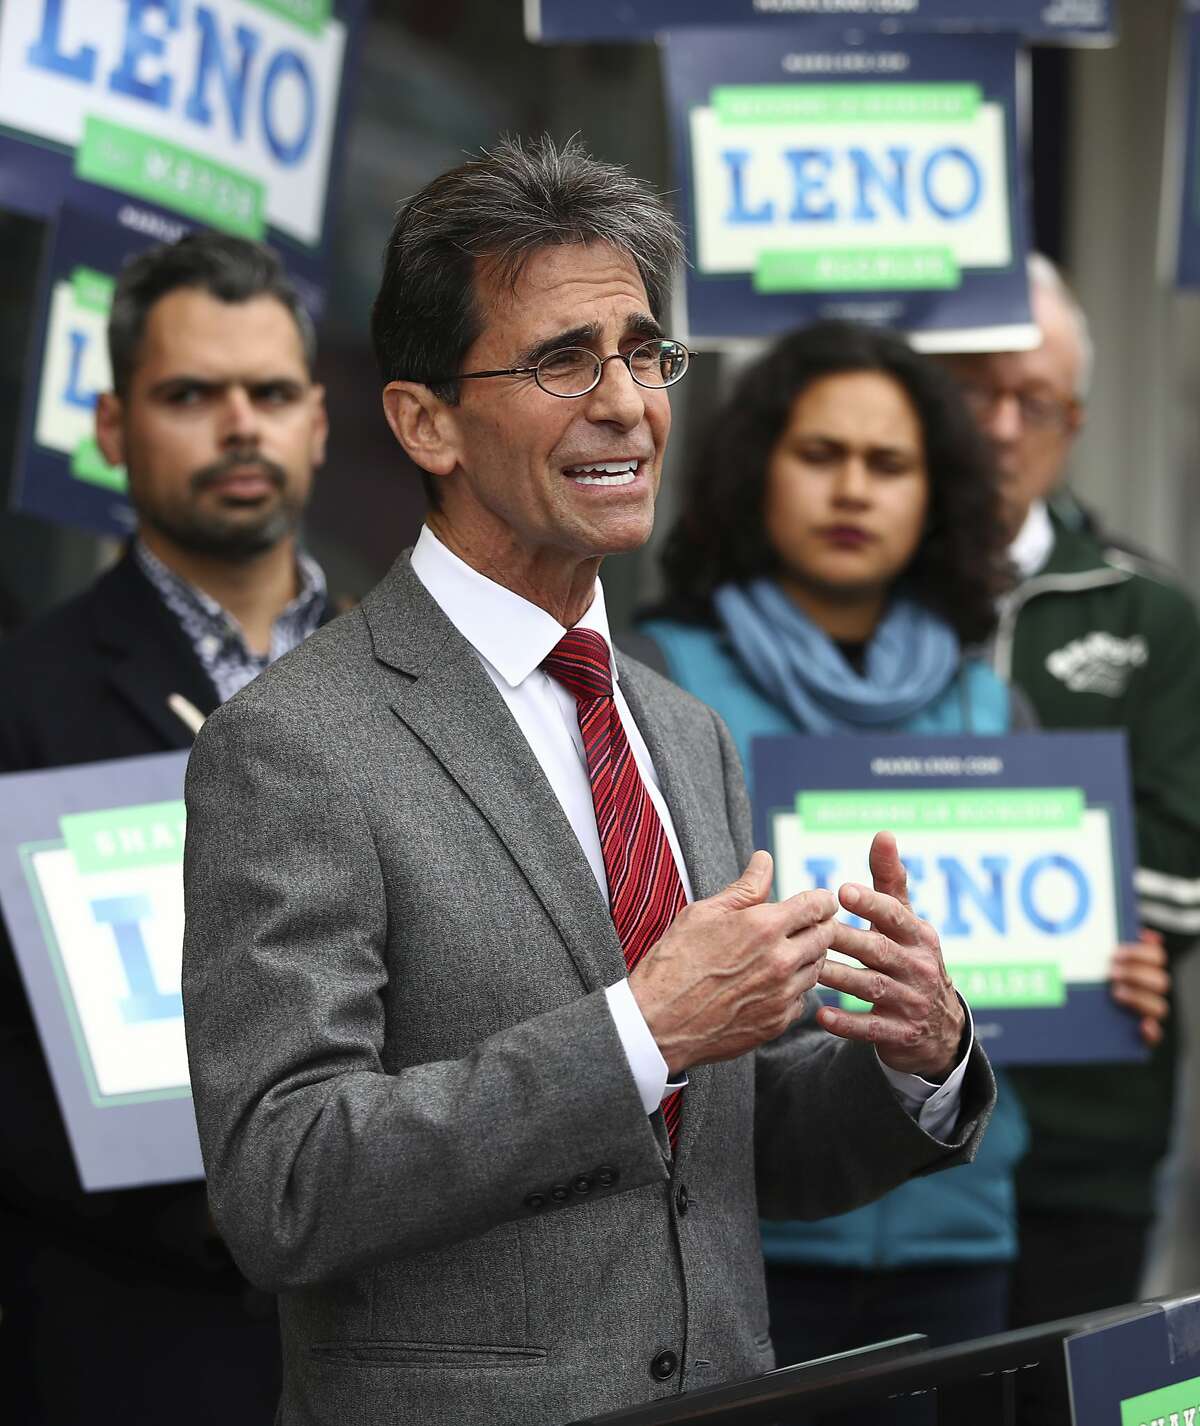 In this photo taken on Wednesday, March 21, 2018, San Francisco Mayoral candidate Mark Leno gestures while speaking to supporters in San Francisco. (AP Photo/Ben Margot)